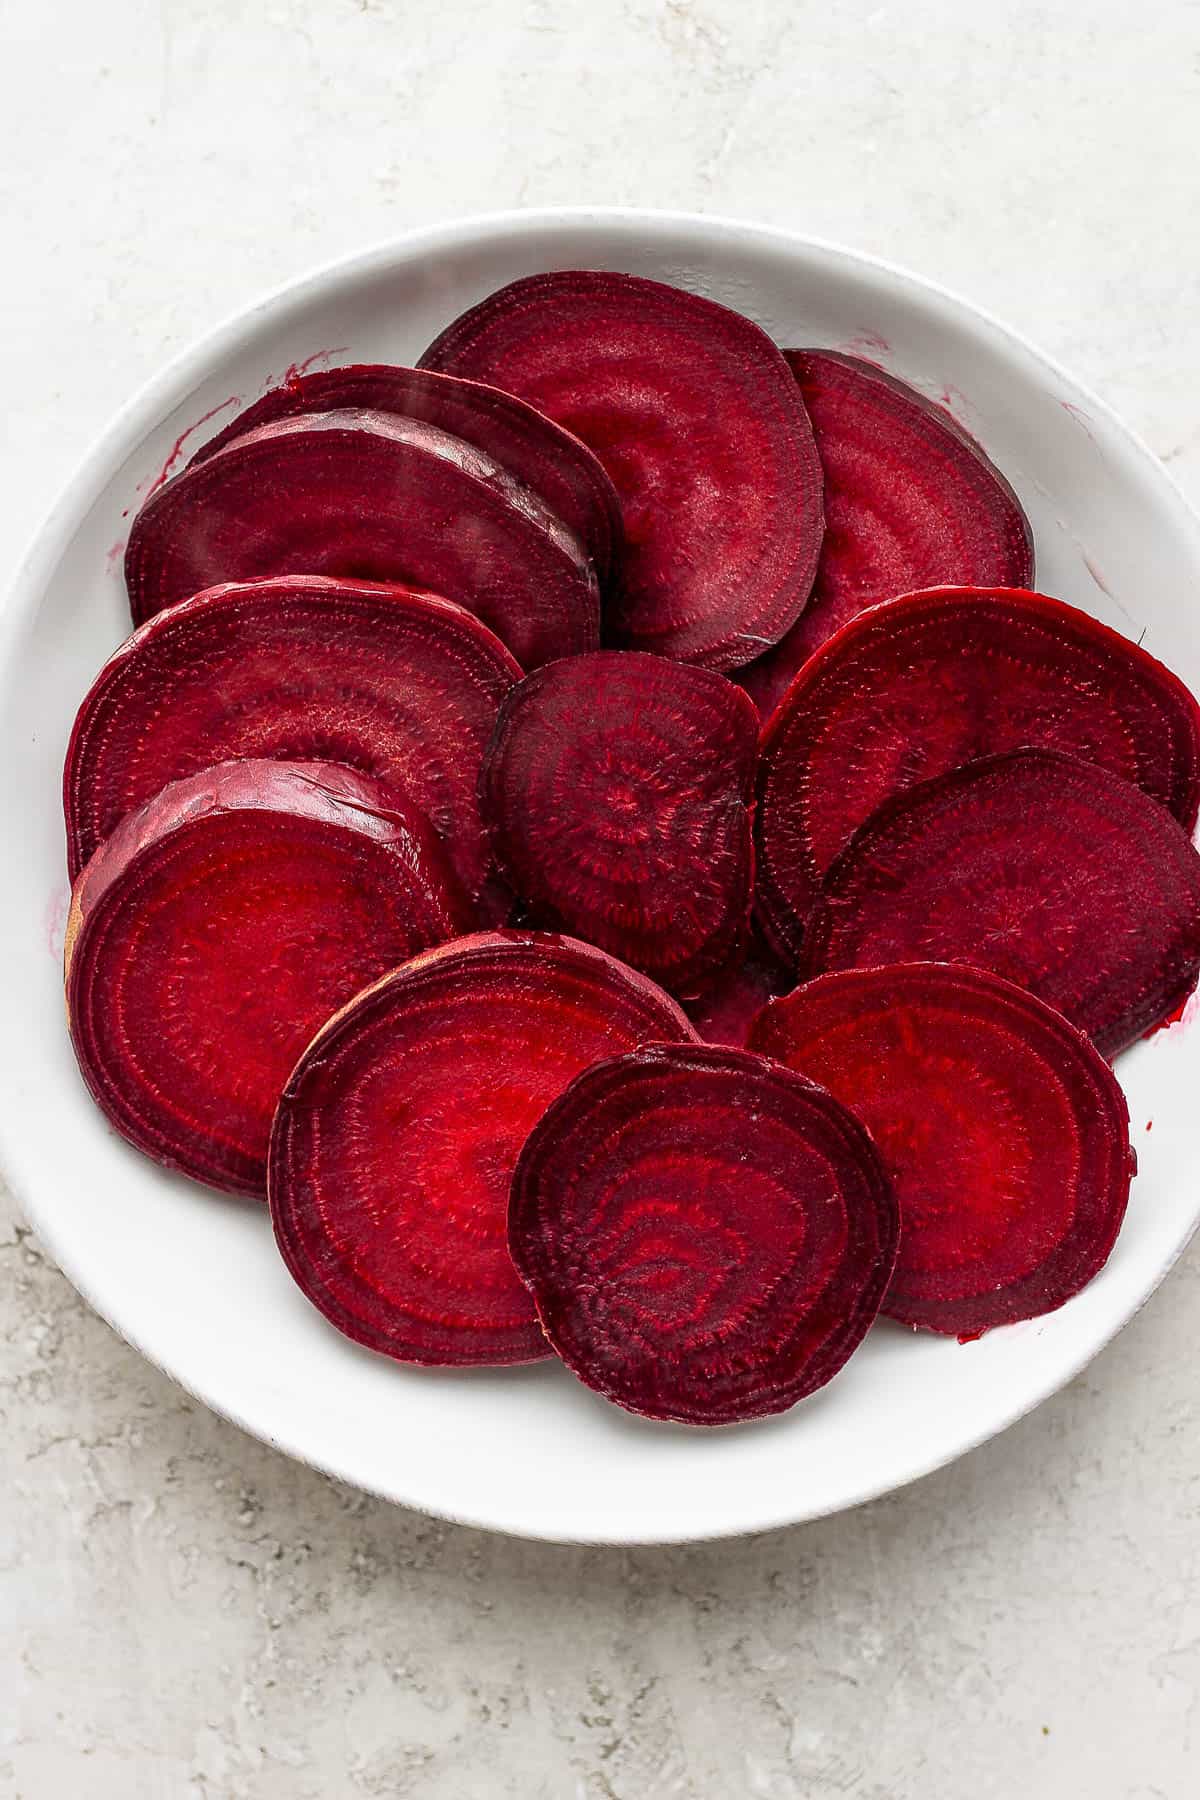 Boiled beets in white bowl sliced after cooking